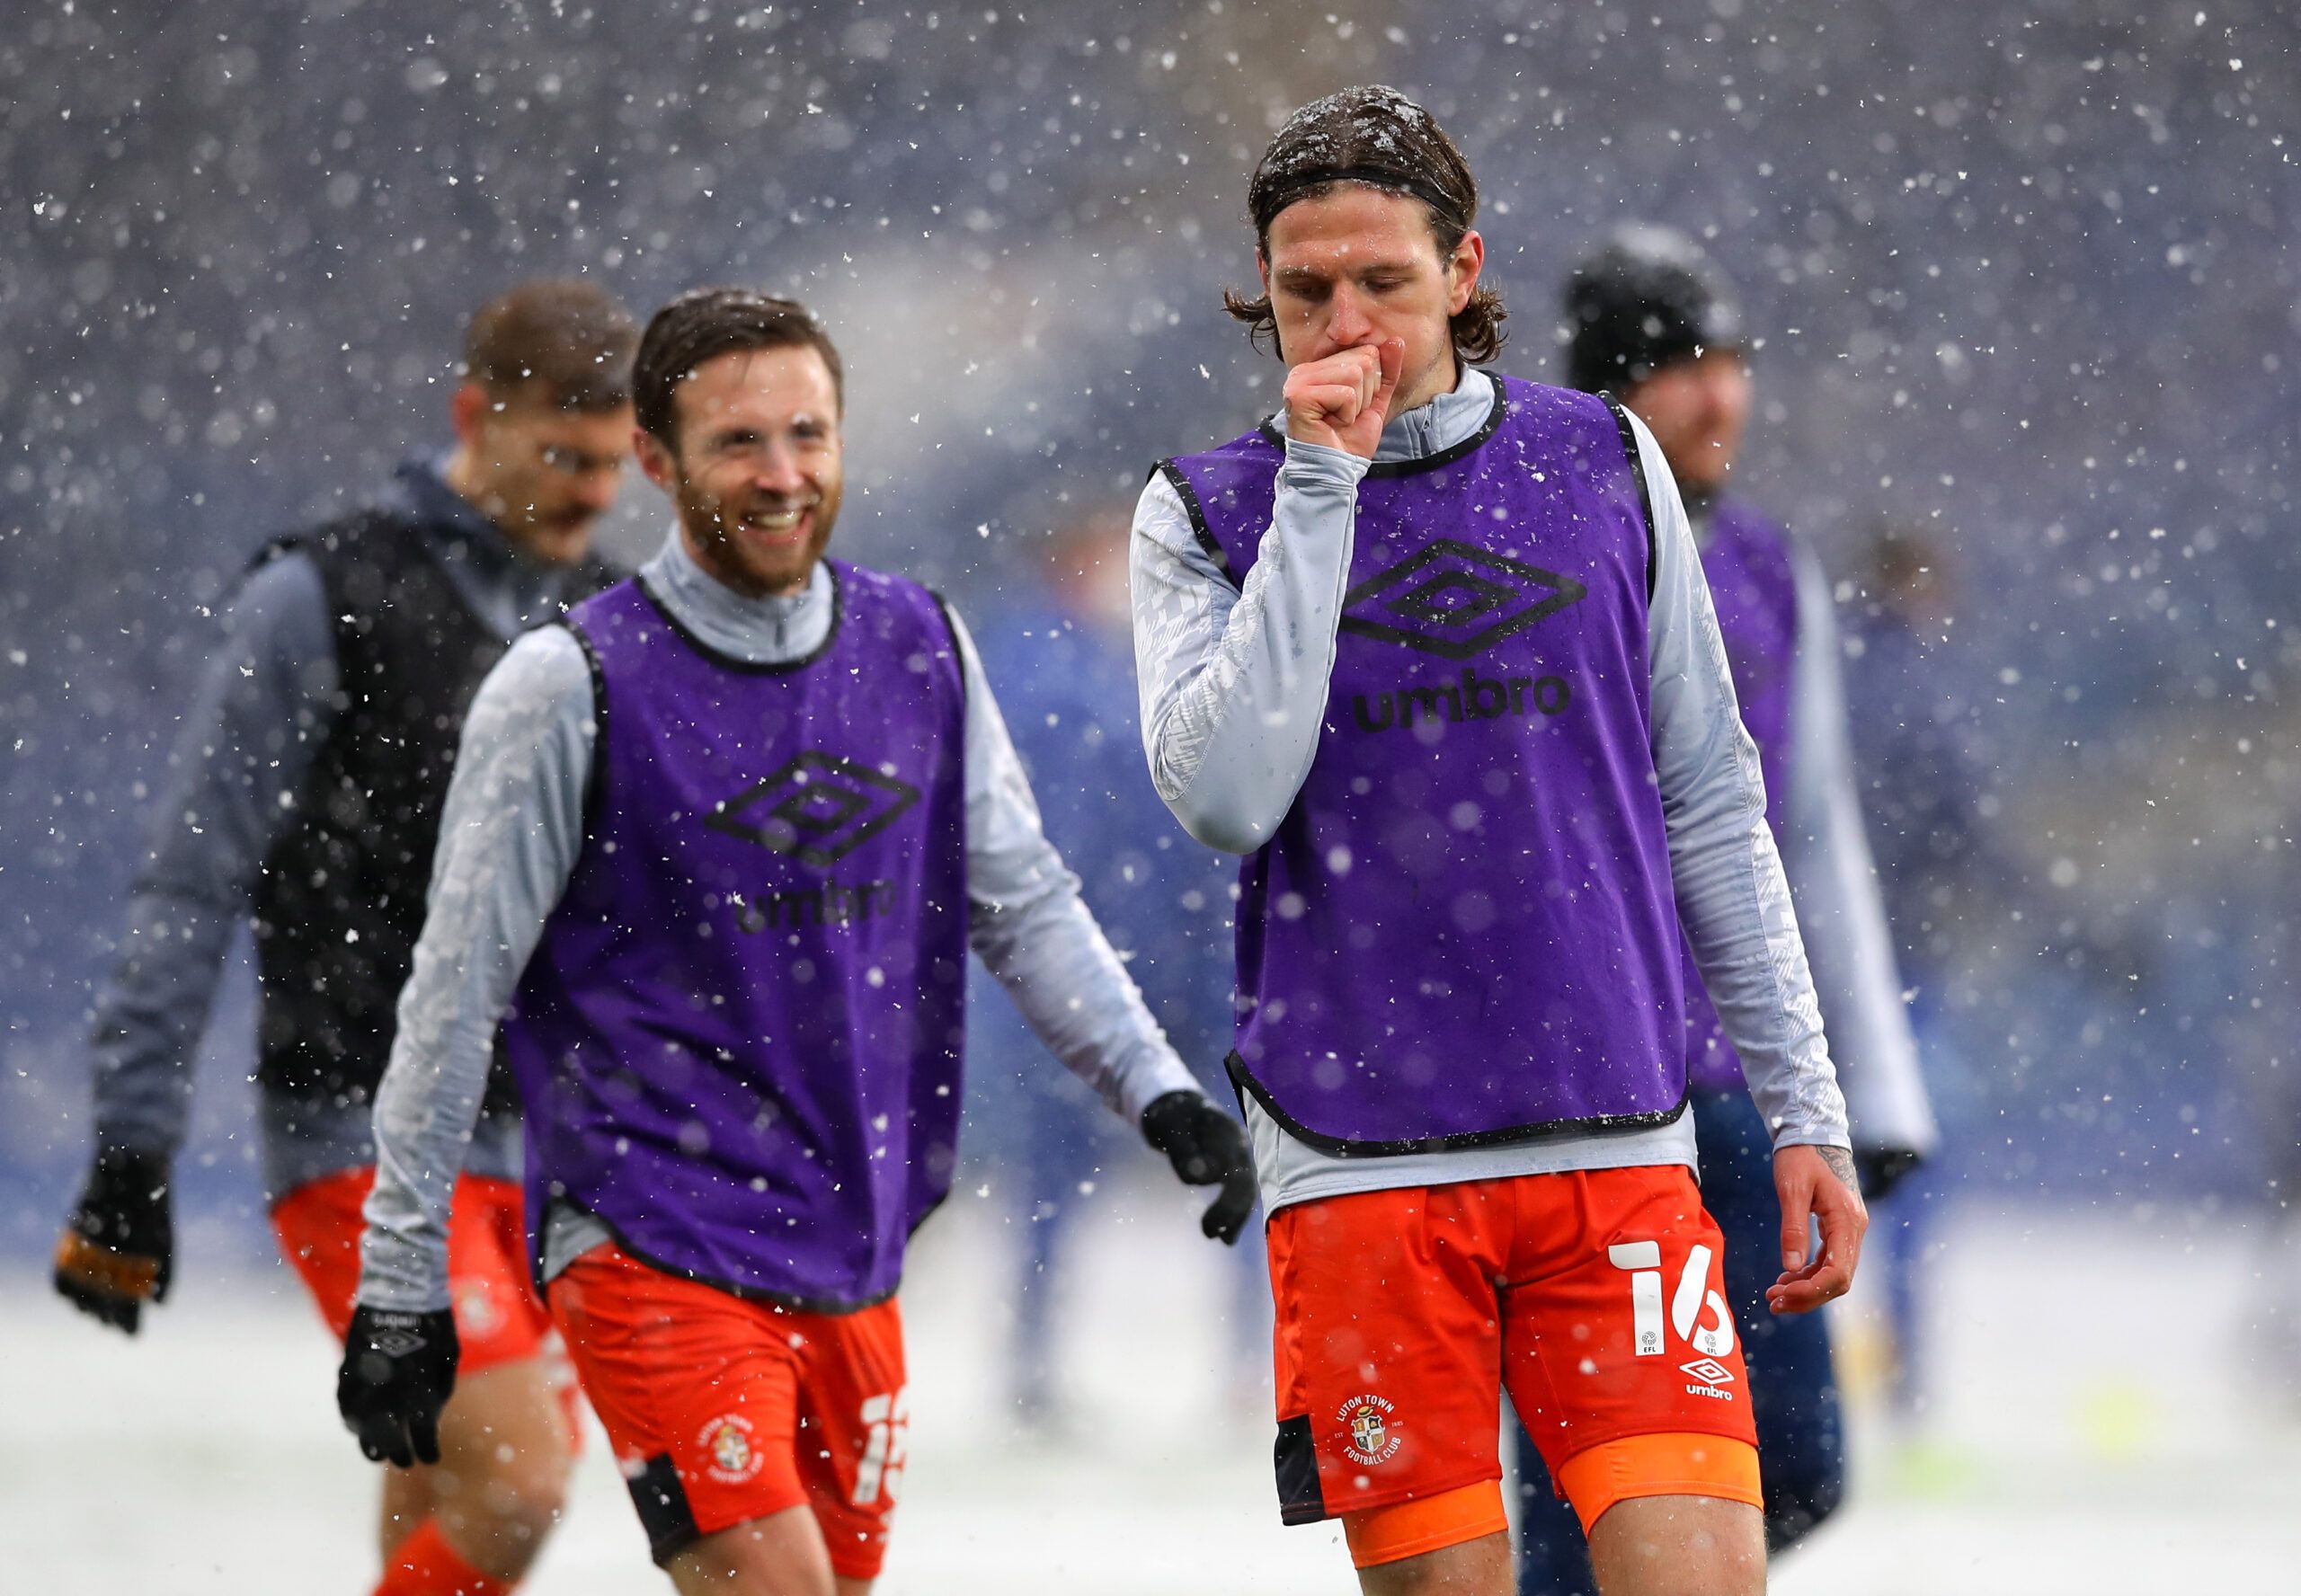 Soccer Football - FA Cup - Fourth Round - Chelsea v Luton Town - Stamford Bridge, London, Britain - January 24, 2021 Luton Town's Glen Rea with teammates during the warm up before the match REUTERS/David Klein